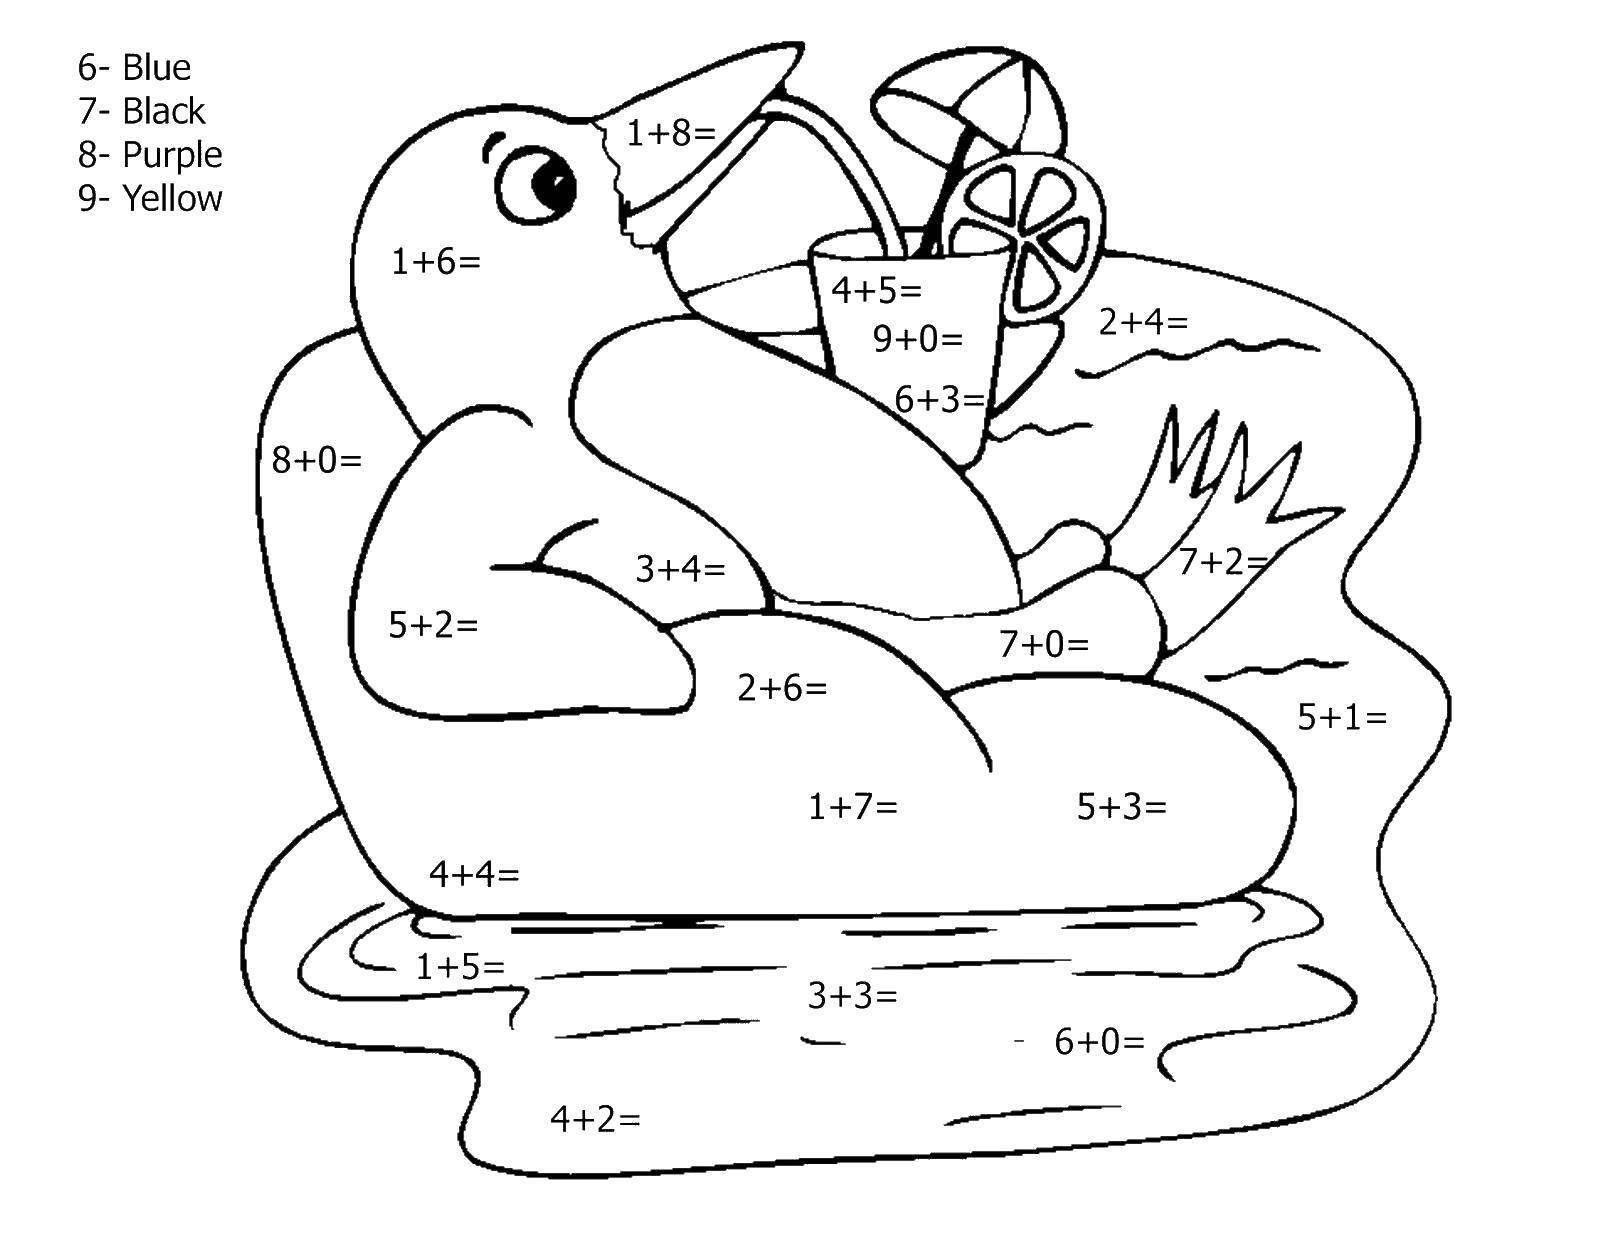 Coloring Platypus drinking juice. Category mathematical coloring pages. Tags:  platypus, animals.